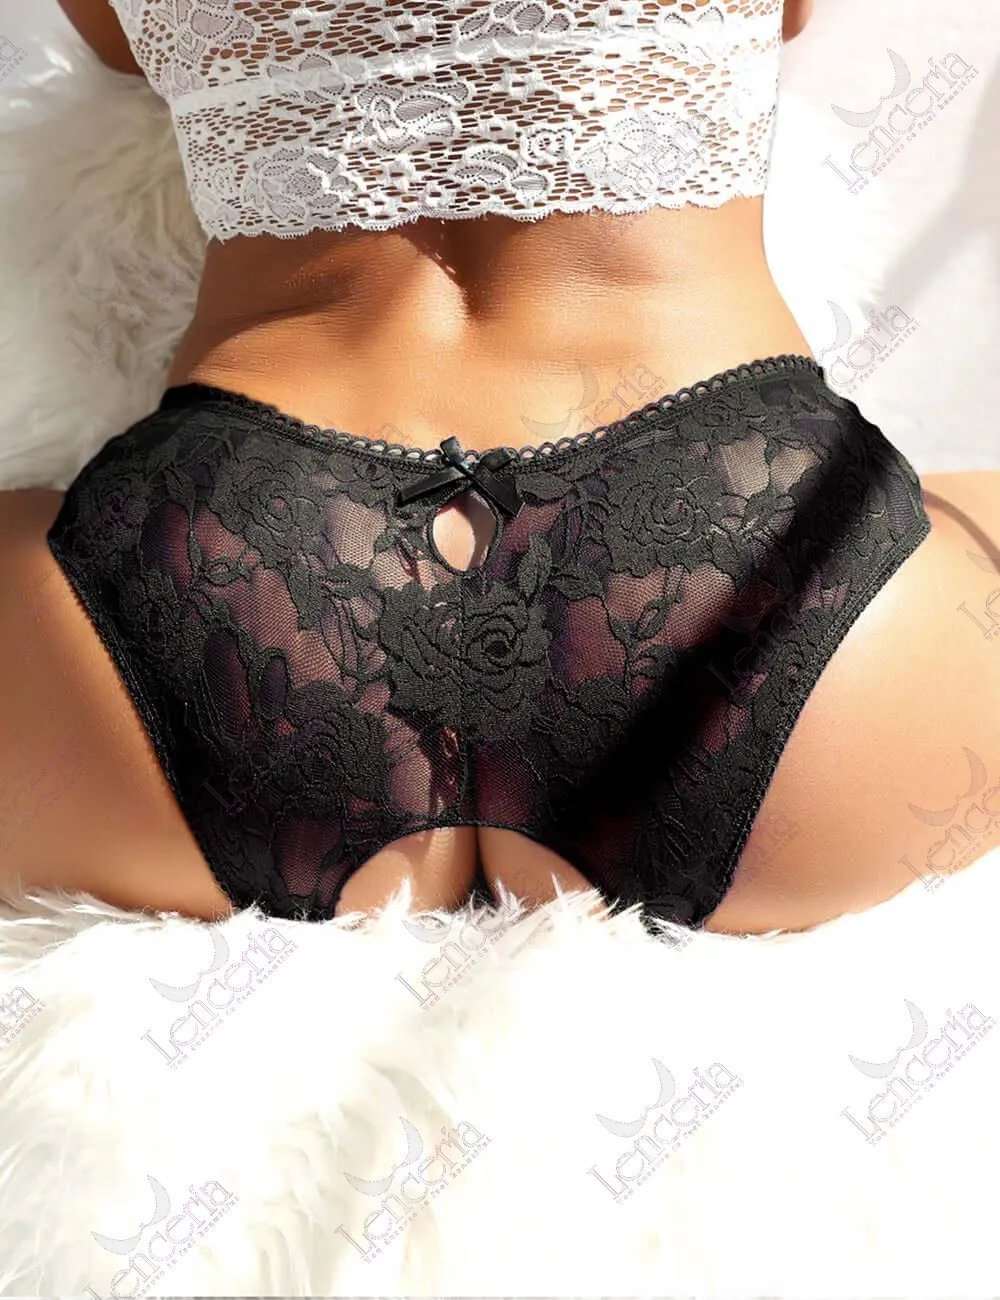 Allure Crotchless Black Panty - extremely sexy (a37)